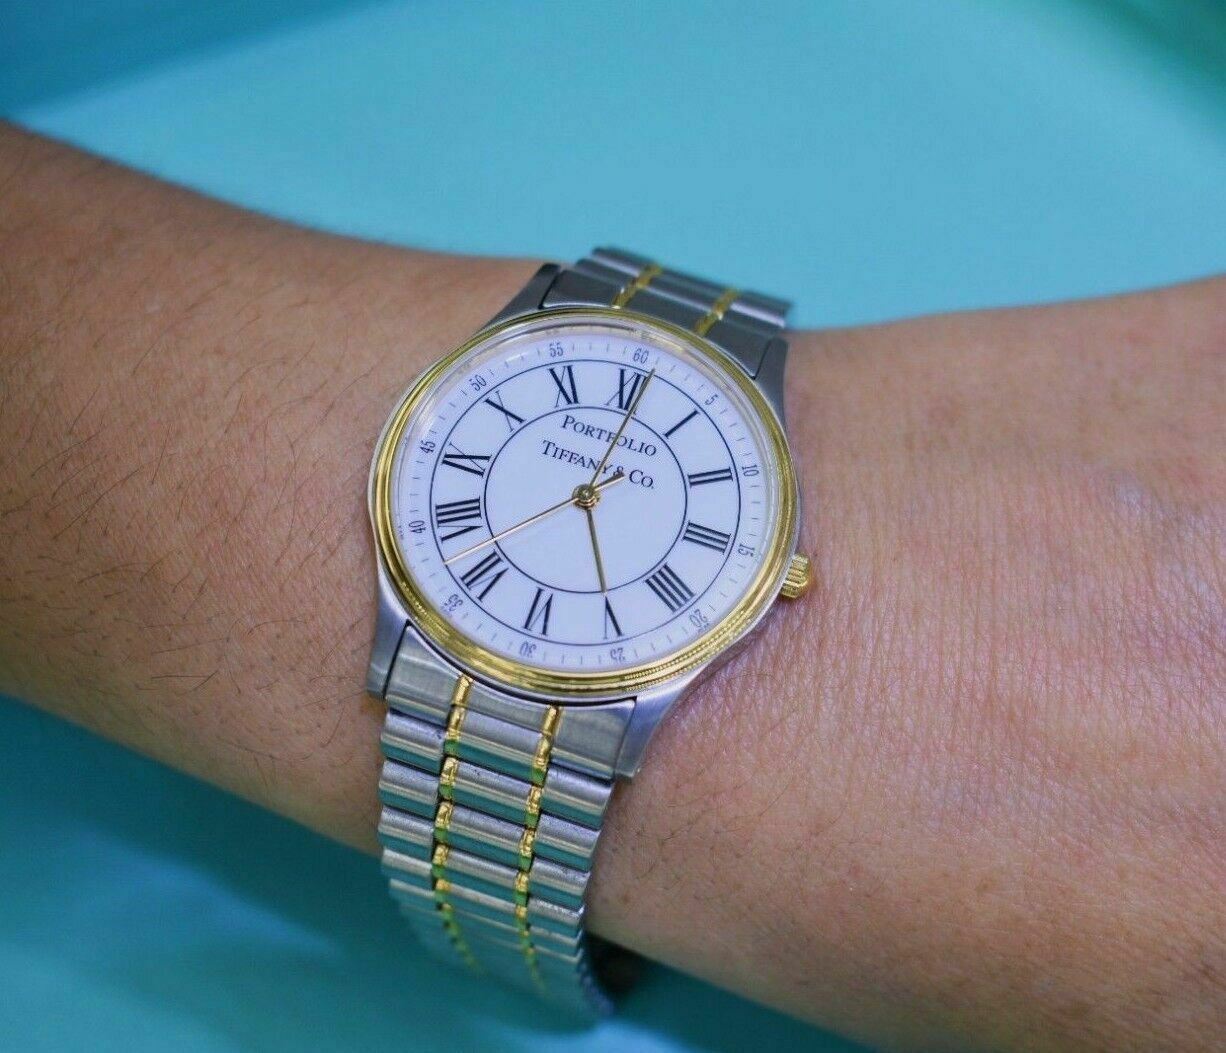 Tiffany & Co. 18K Yellow Gold and Stainless Steel Portfolio Watch